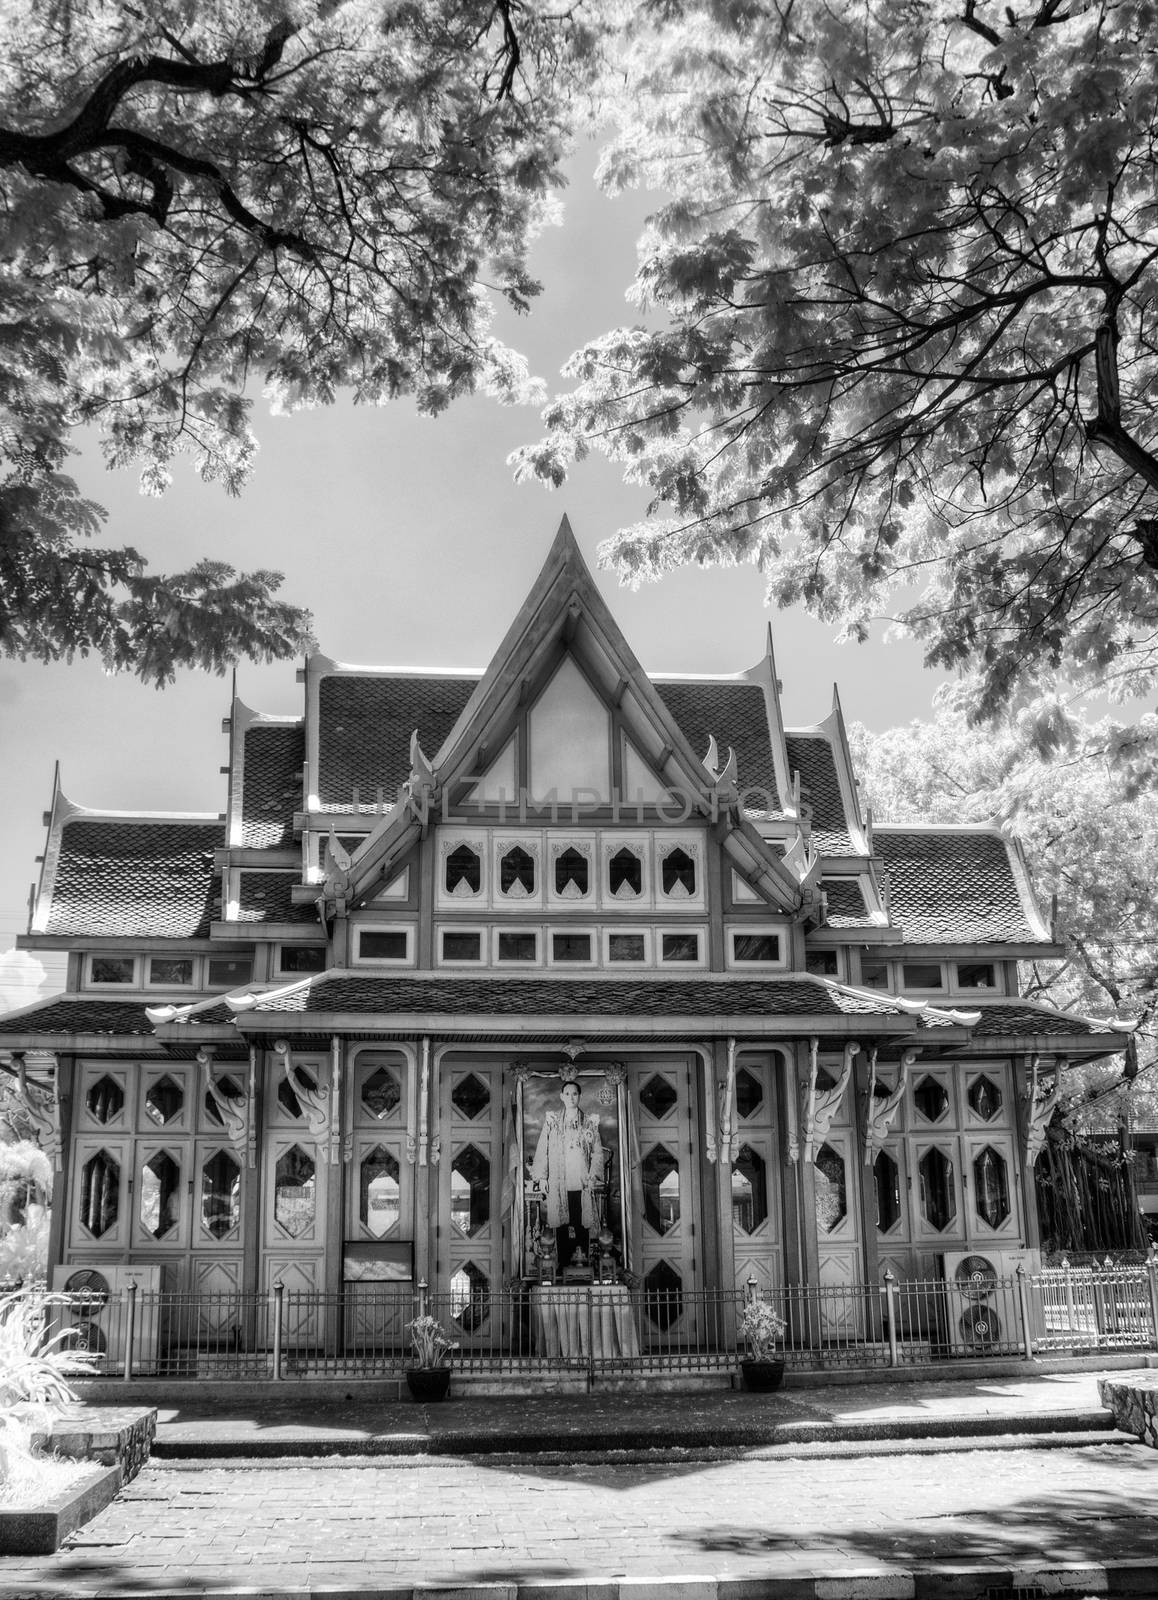 Black and White, Infrared photo of Hua Hin train station in Thailand.